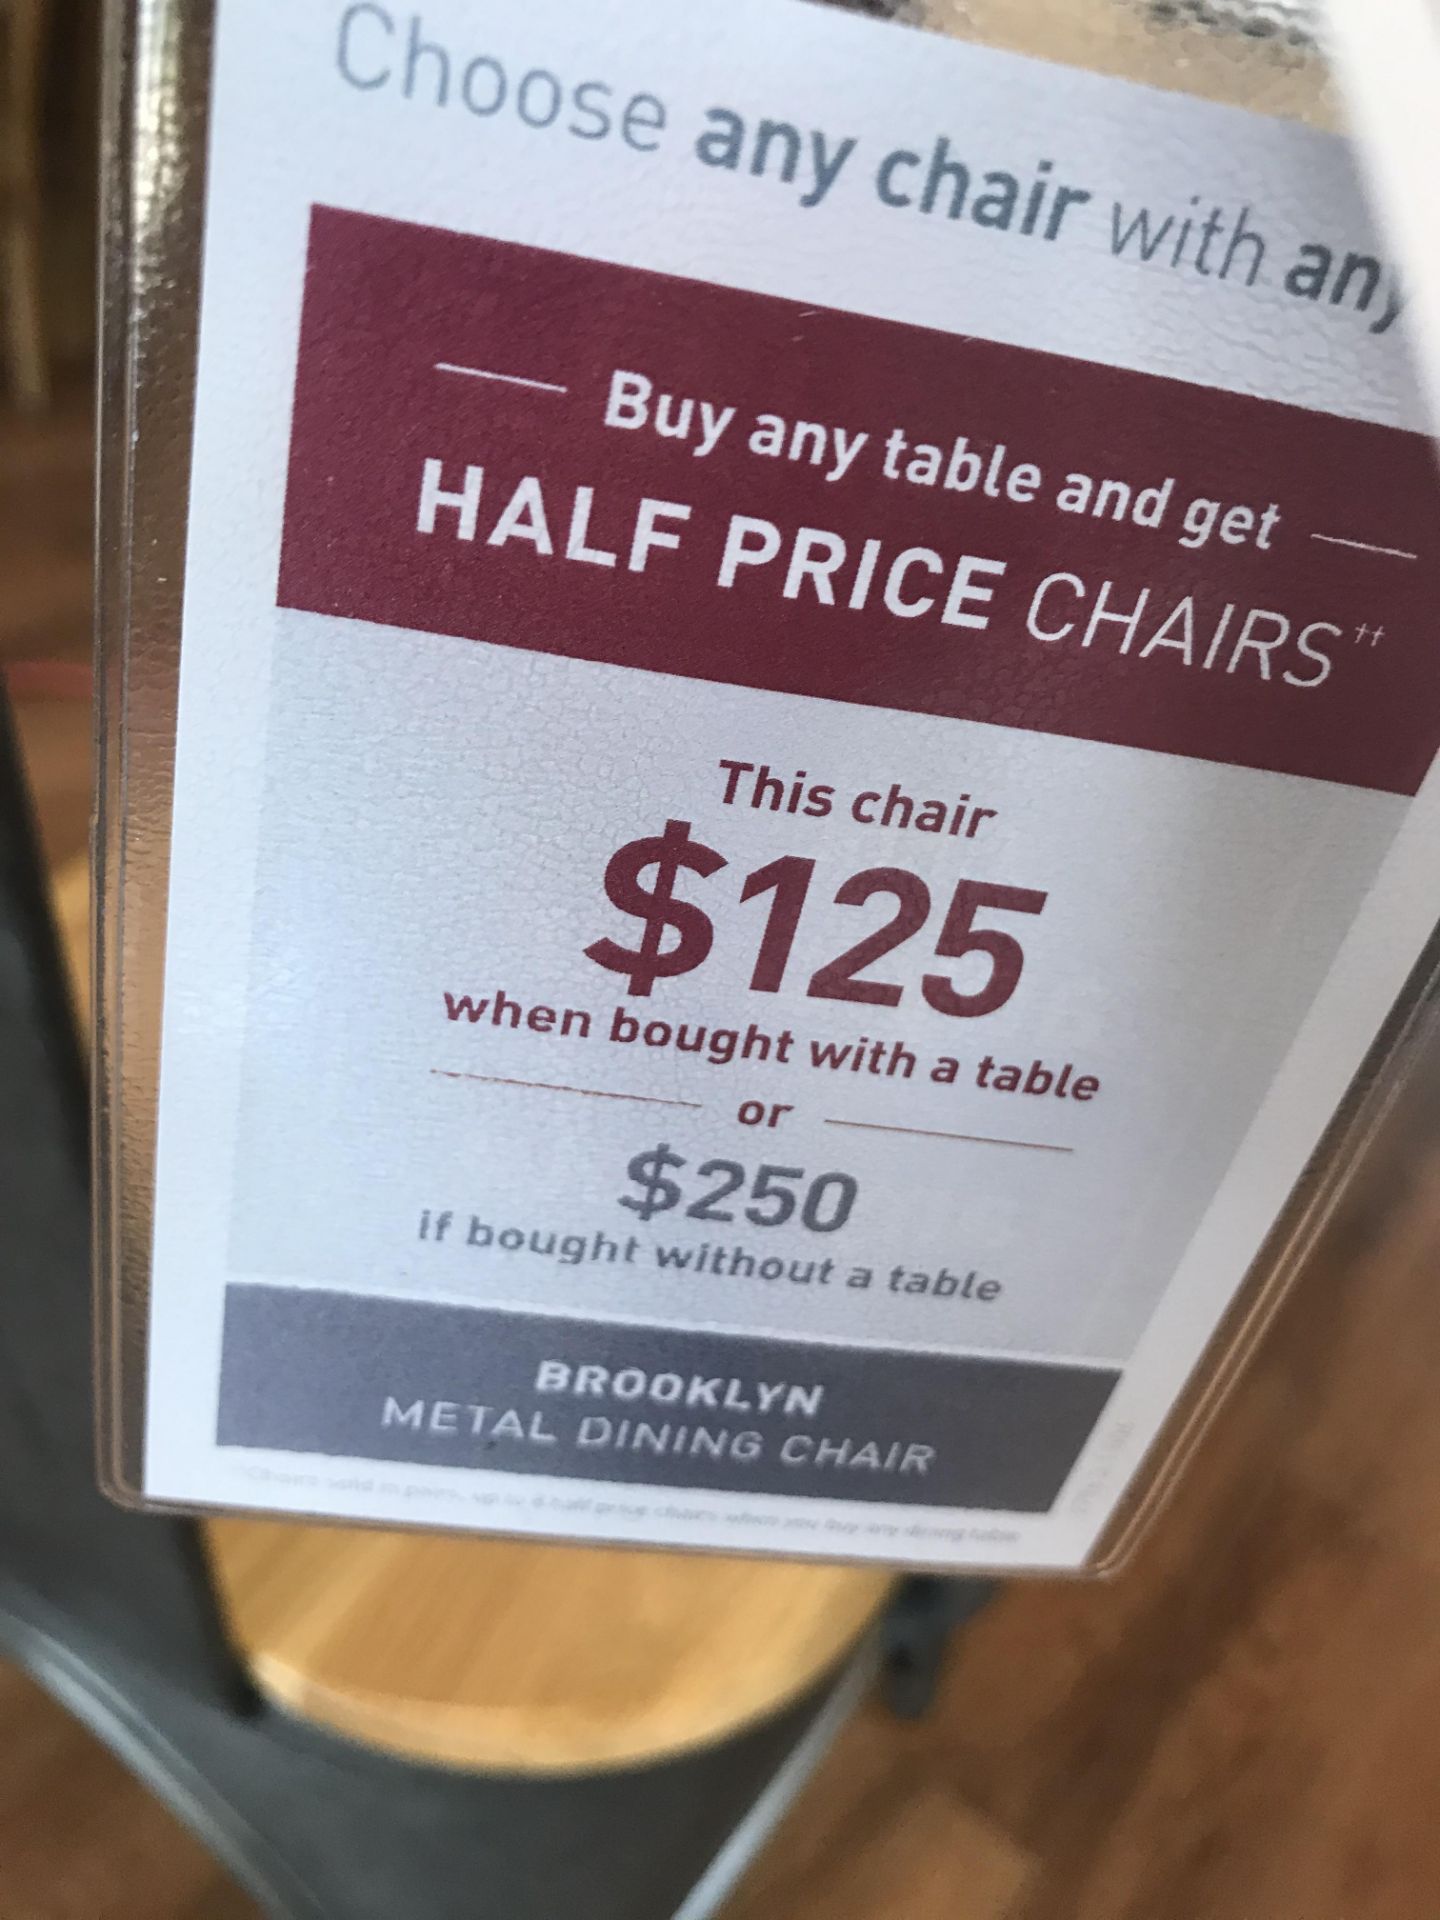 Metal Dining Chair (Brooklyn) See Picture For Dimensions and Product Info - Image 2 of 2